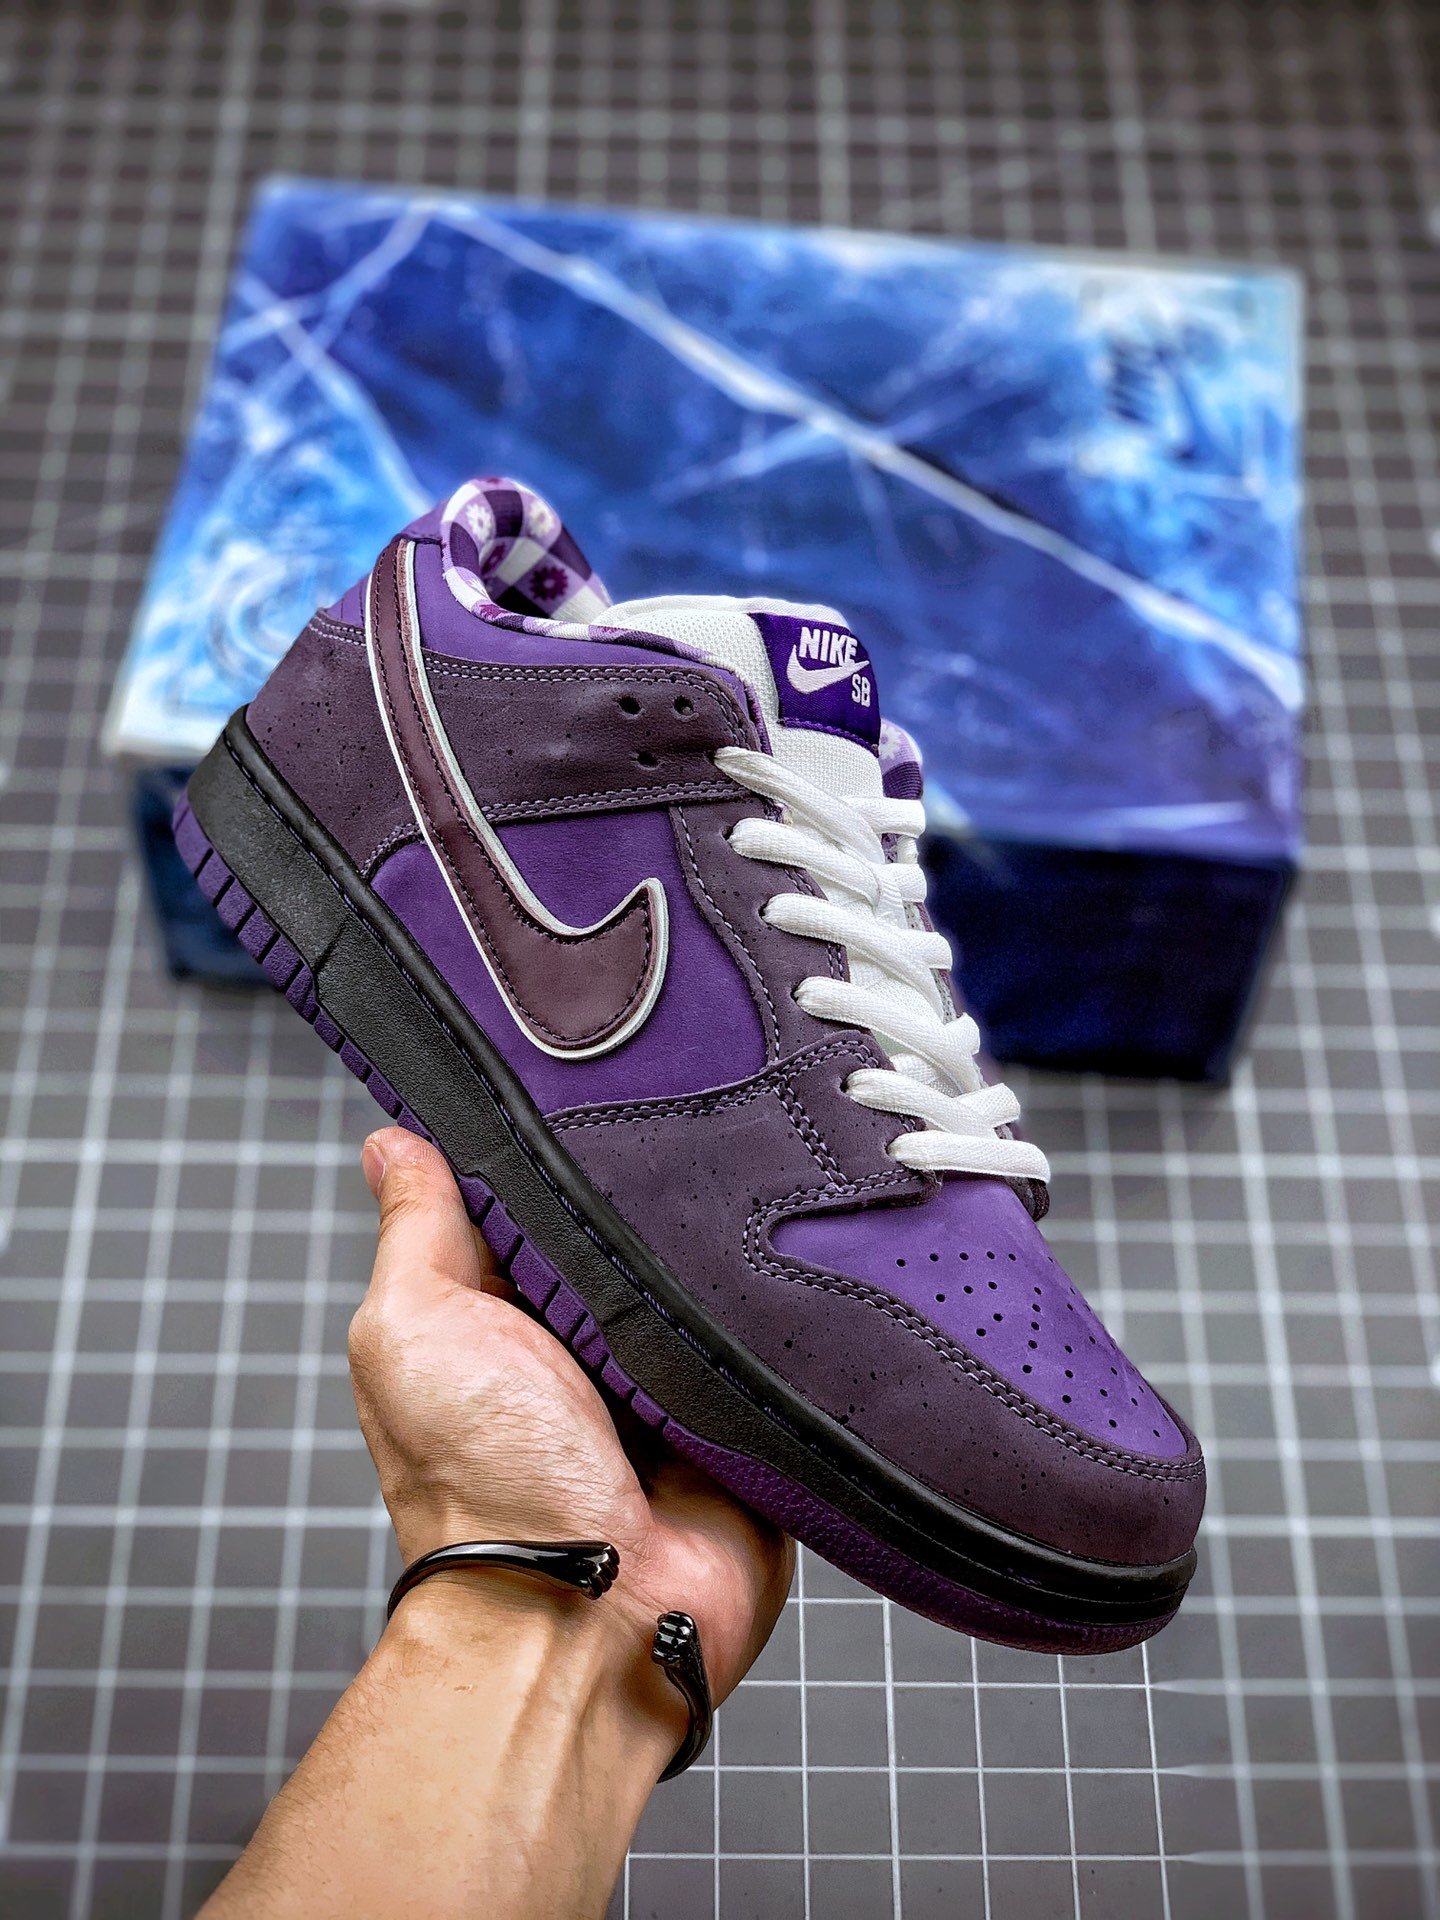 Concepts X Nike Sb Dunk Low “purple Lobster” Bv1310 555 For Sale